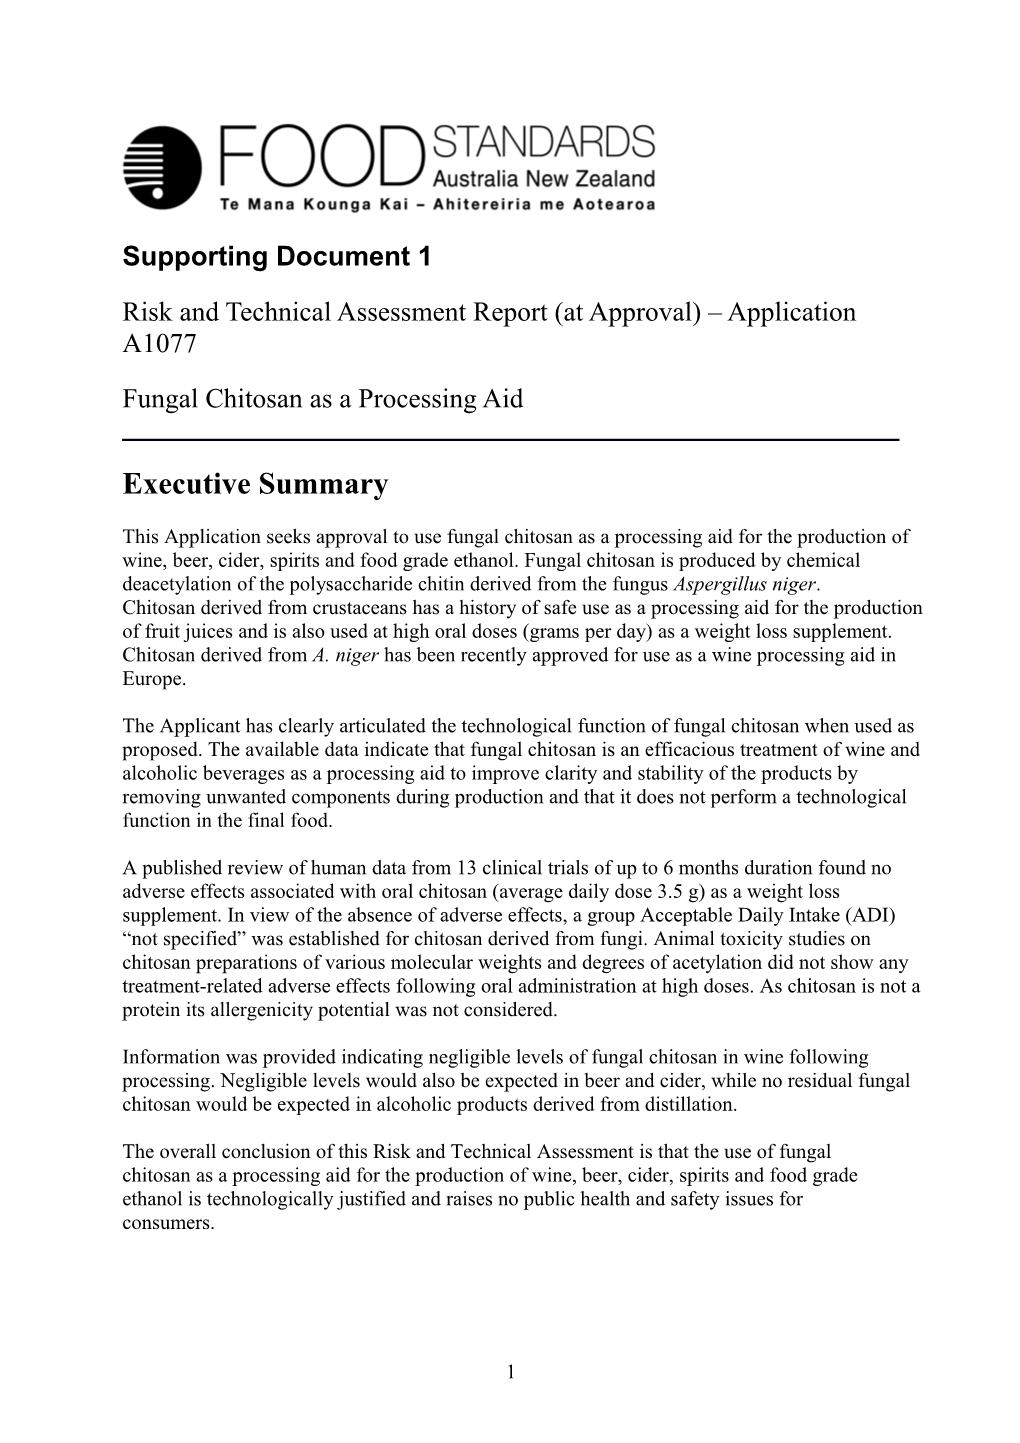 Risk and Technical Assessment Report(At Approval) Application A1077